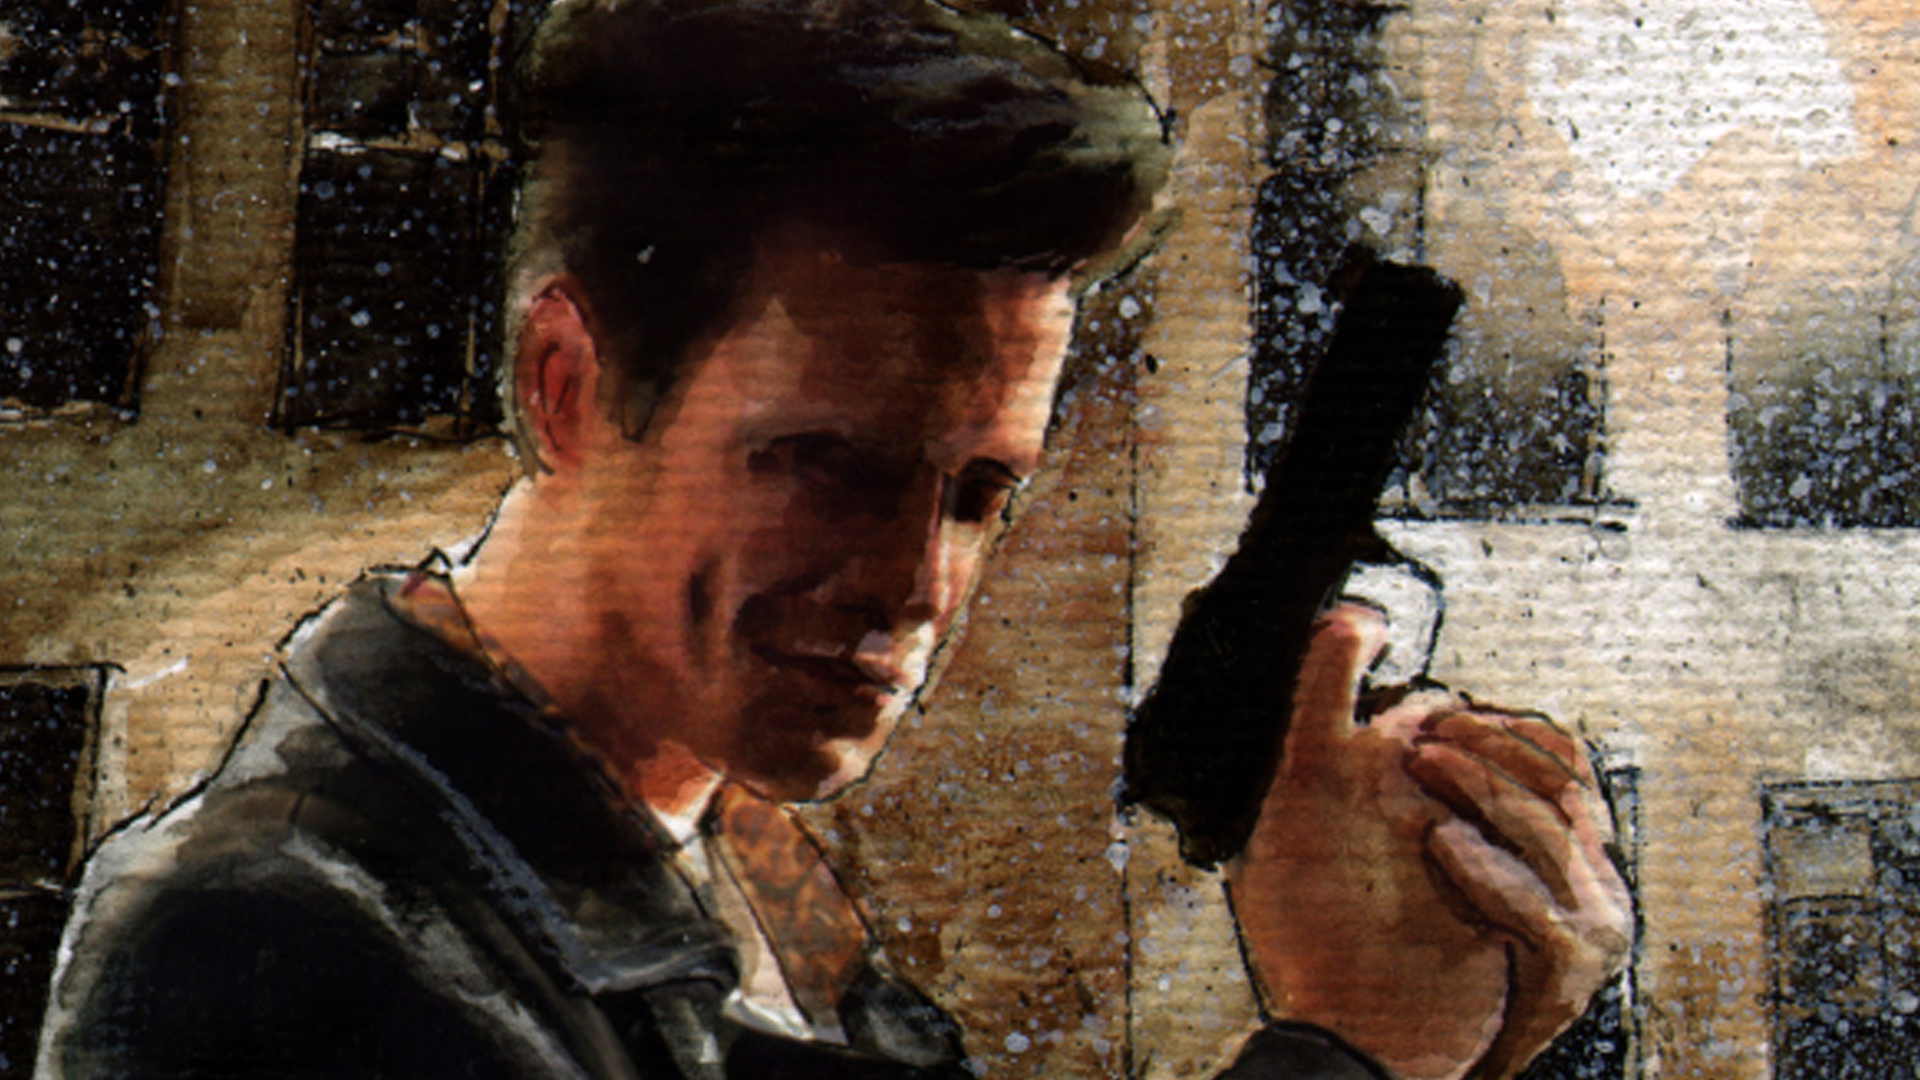 max payne 4 is upcoming pc game release date